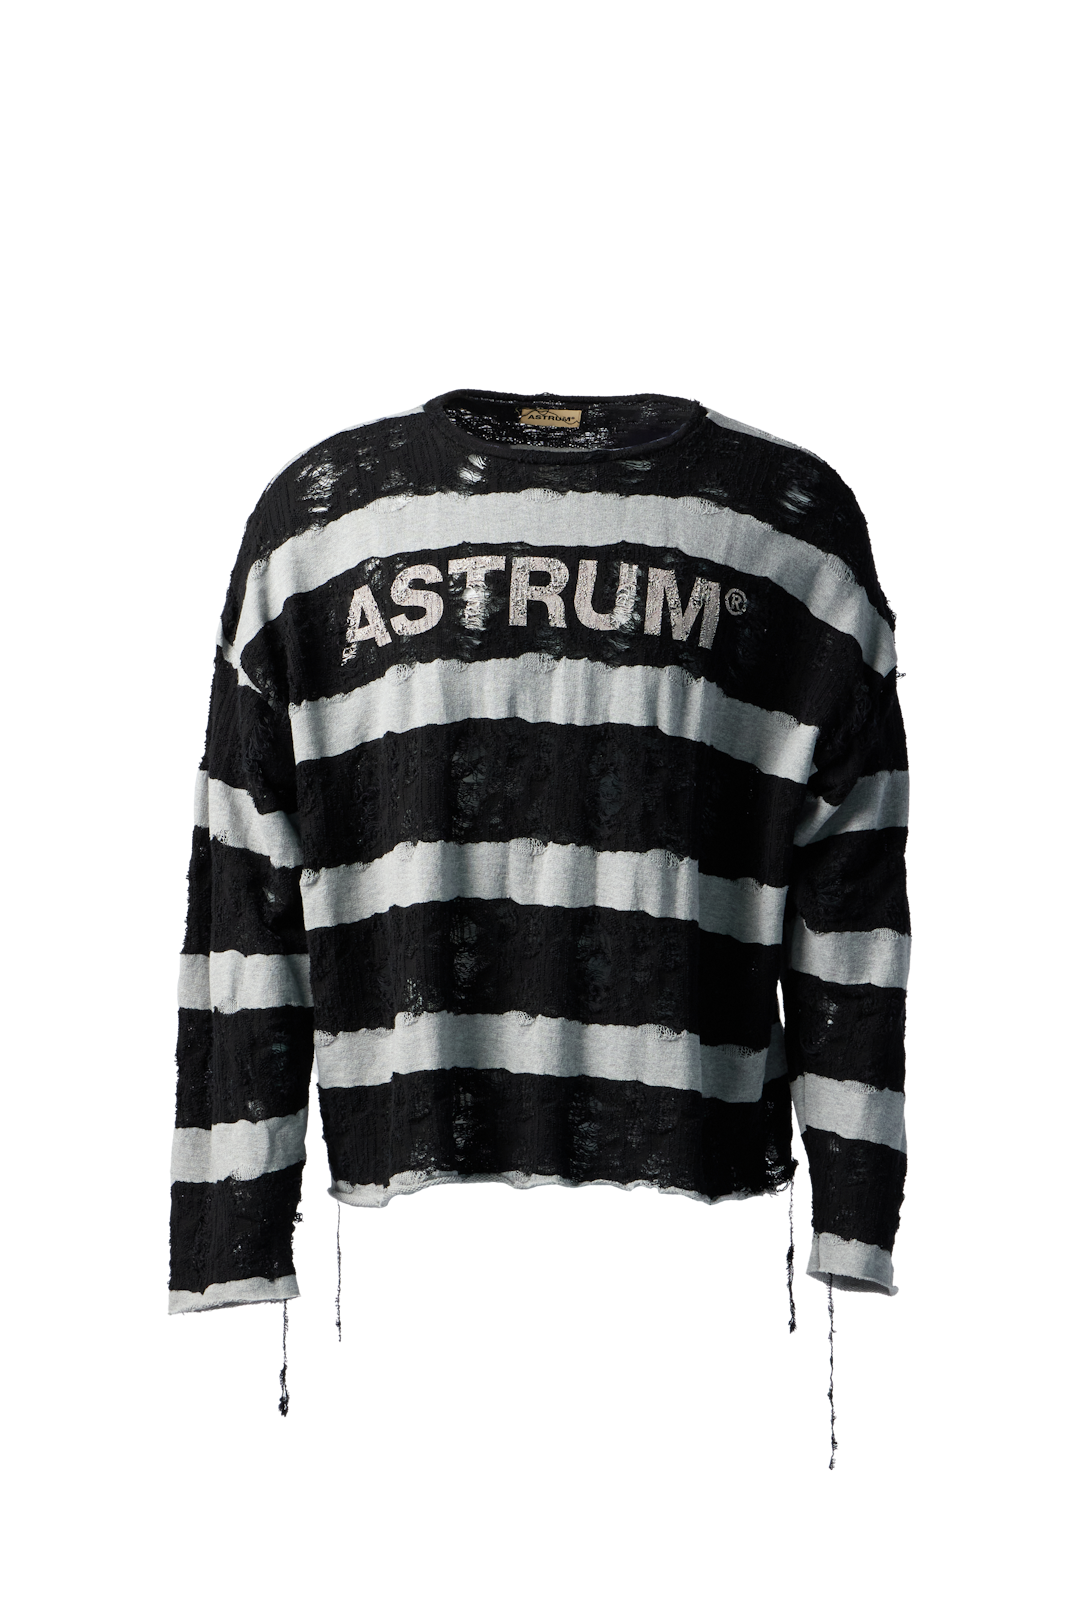 ASTRUM - Allure Knit product image